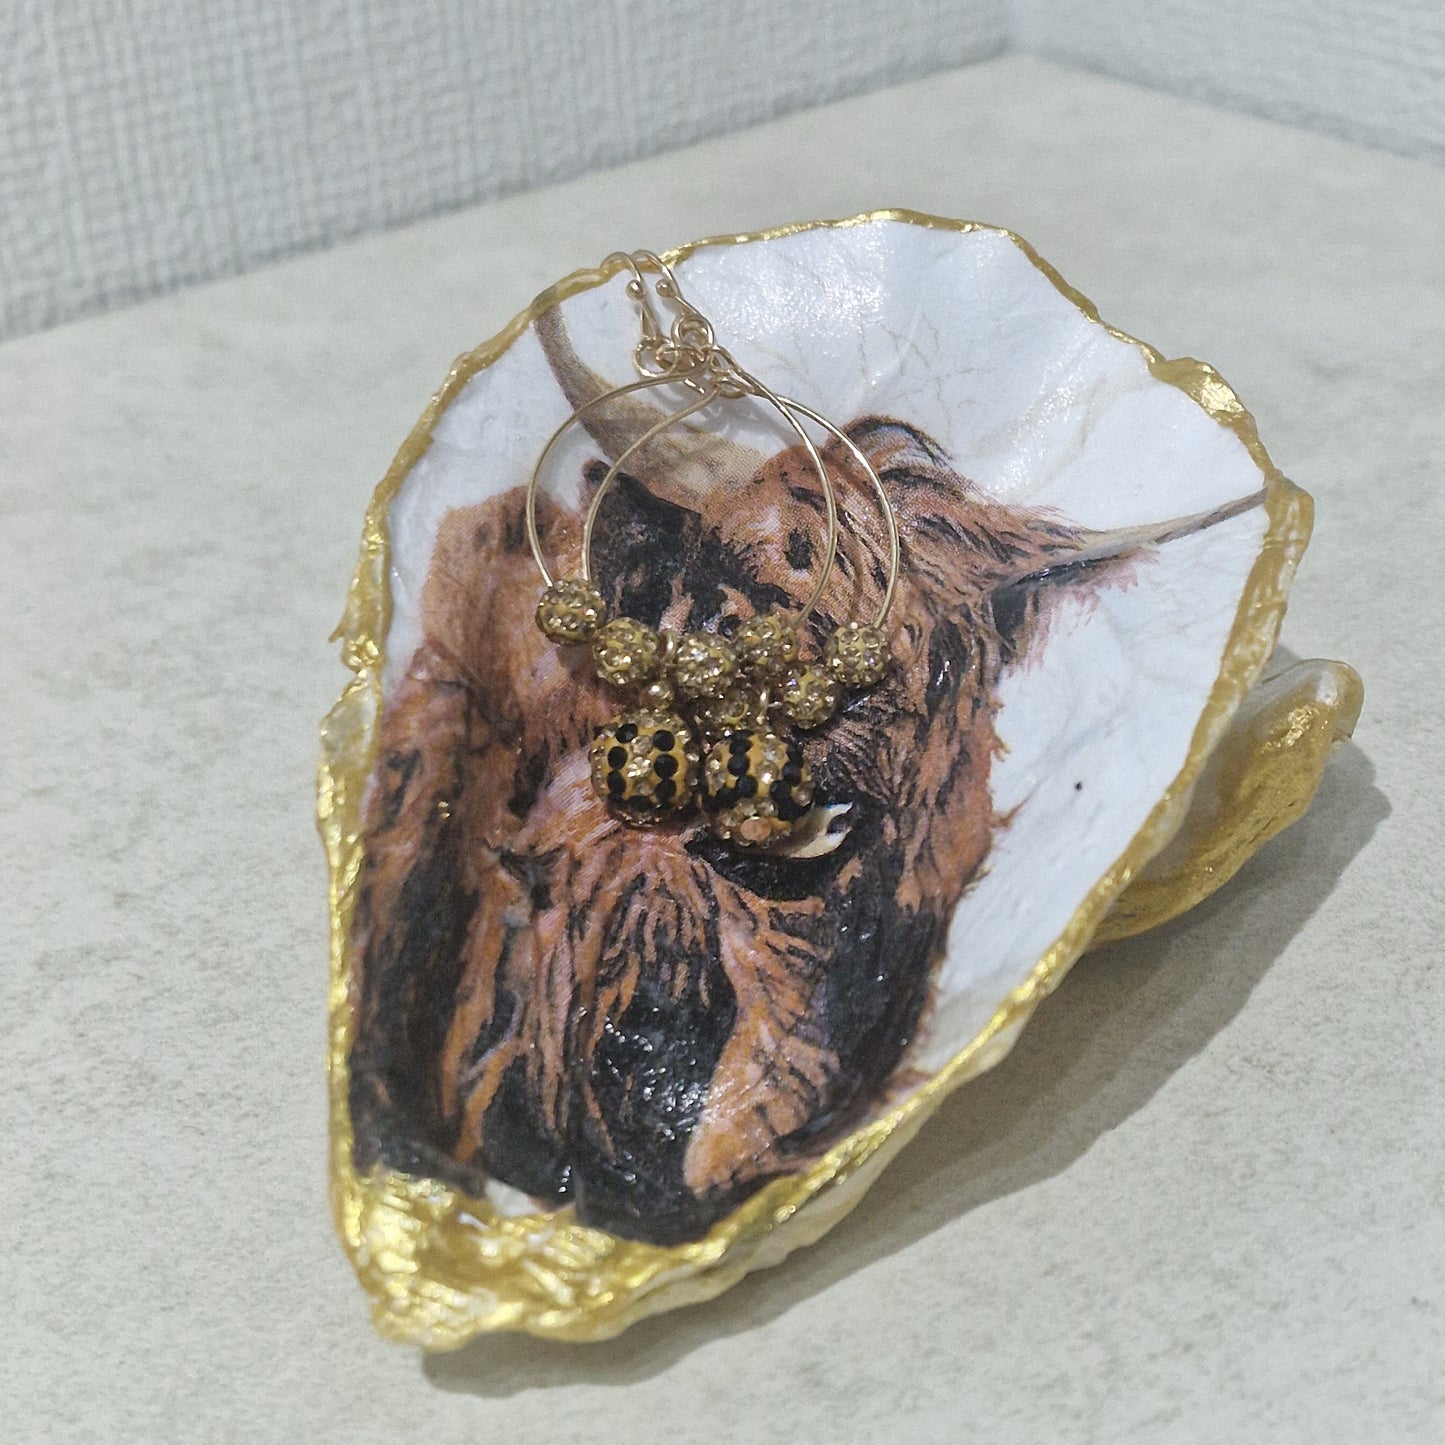 NEW Highland Cow Scotland Oyster Shell Trinket Dish Jewellery Holder Gift